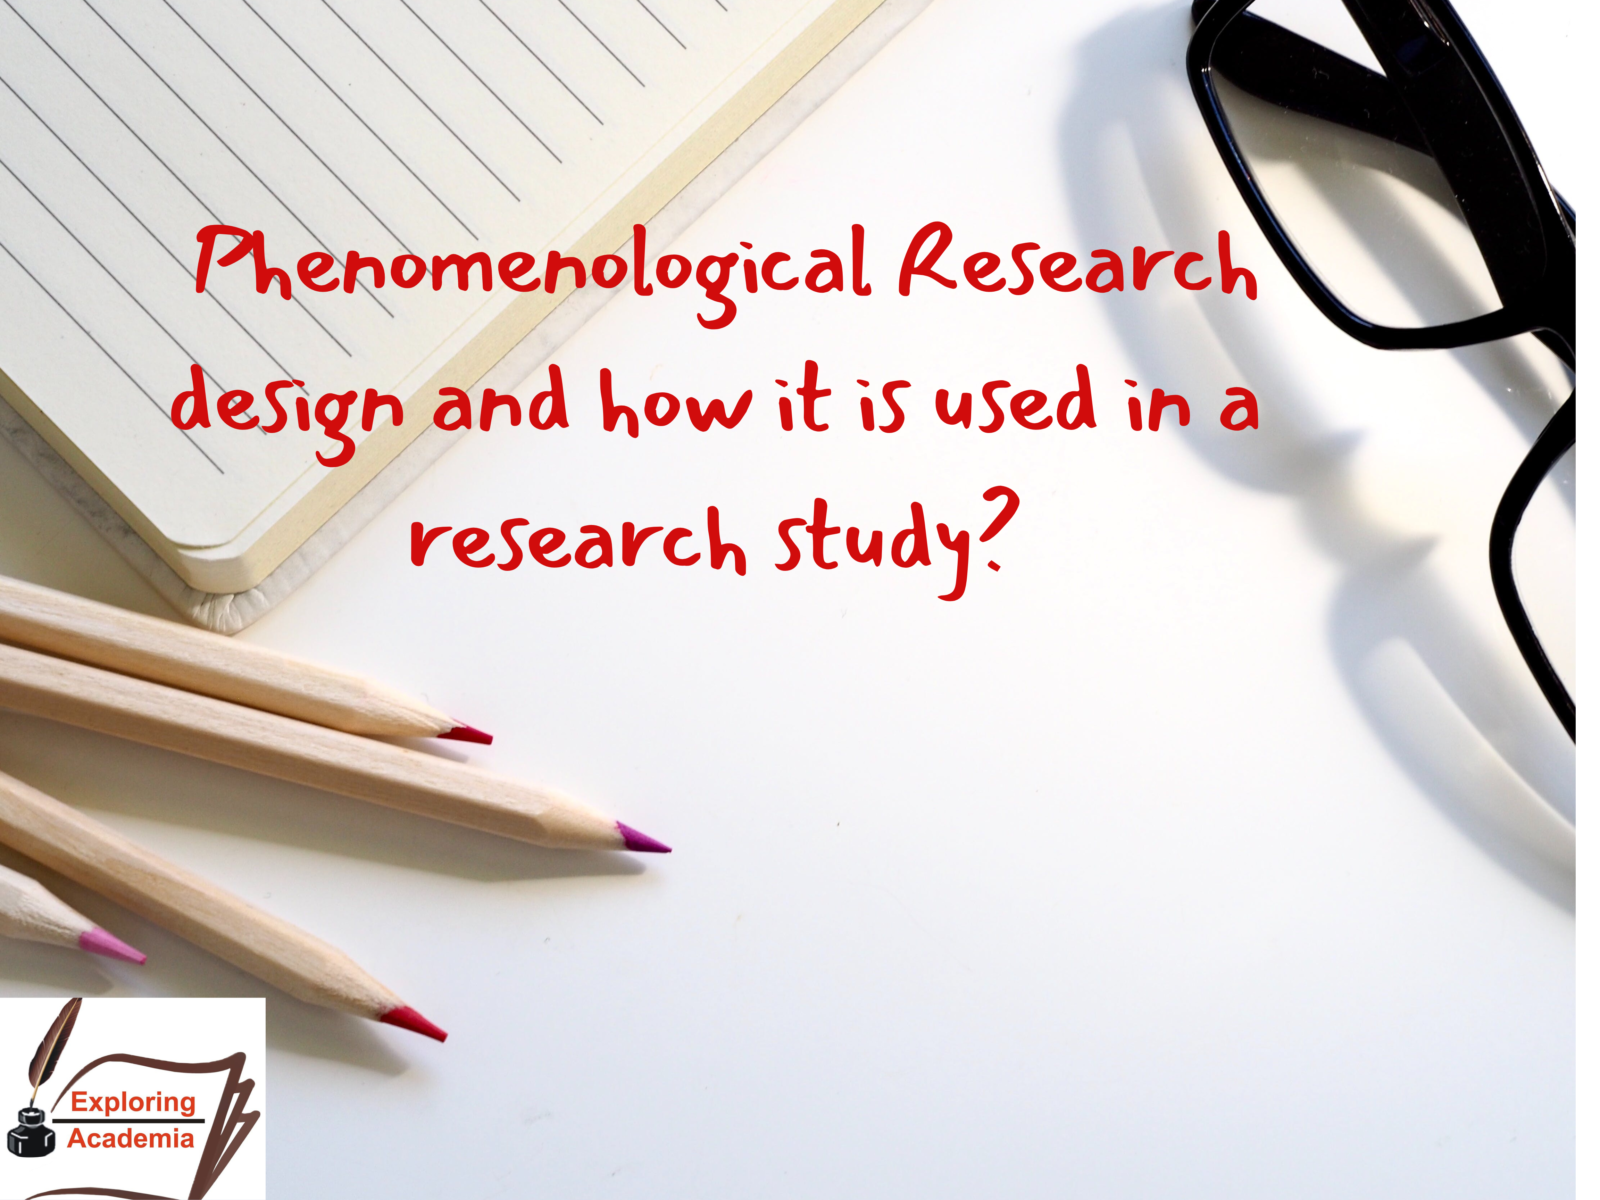 What is phenomenological research design and how it is used in a qualitative research study?